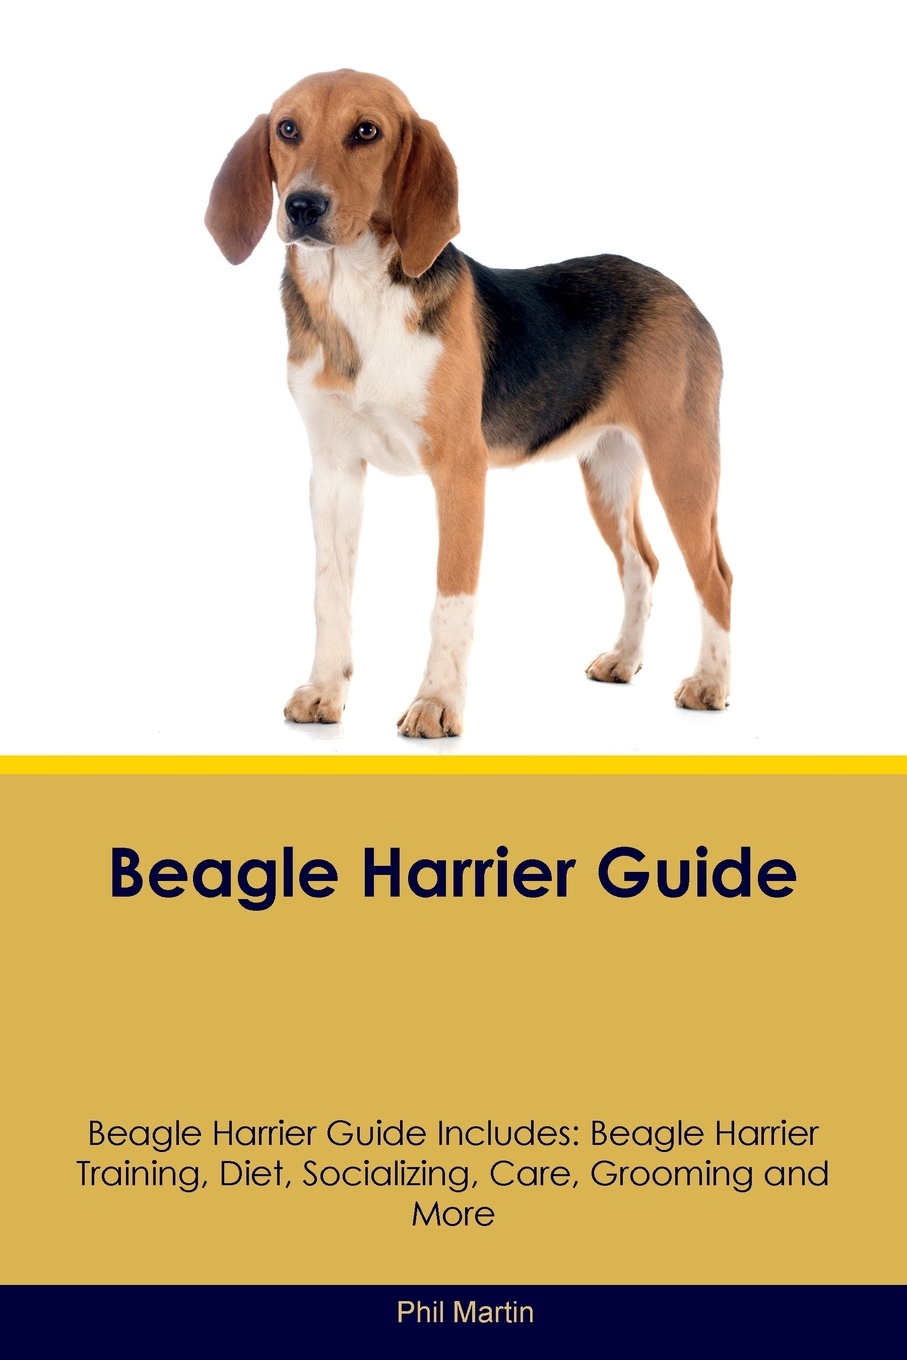 Beagle Harrier Guide Beagle Harrier Guide Includes. Beagle Harrier Training, Diet, Socializing, Care, Grooming, Breeding and More